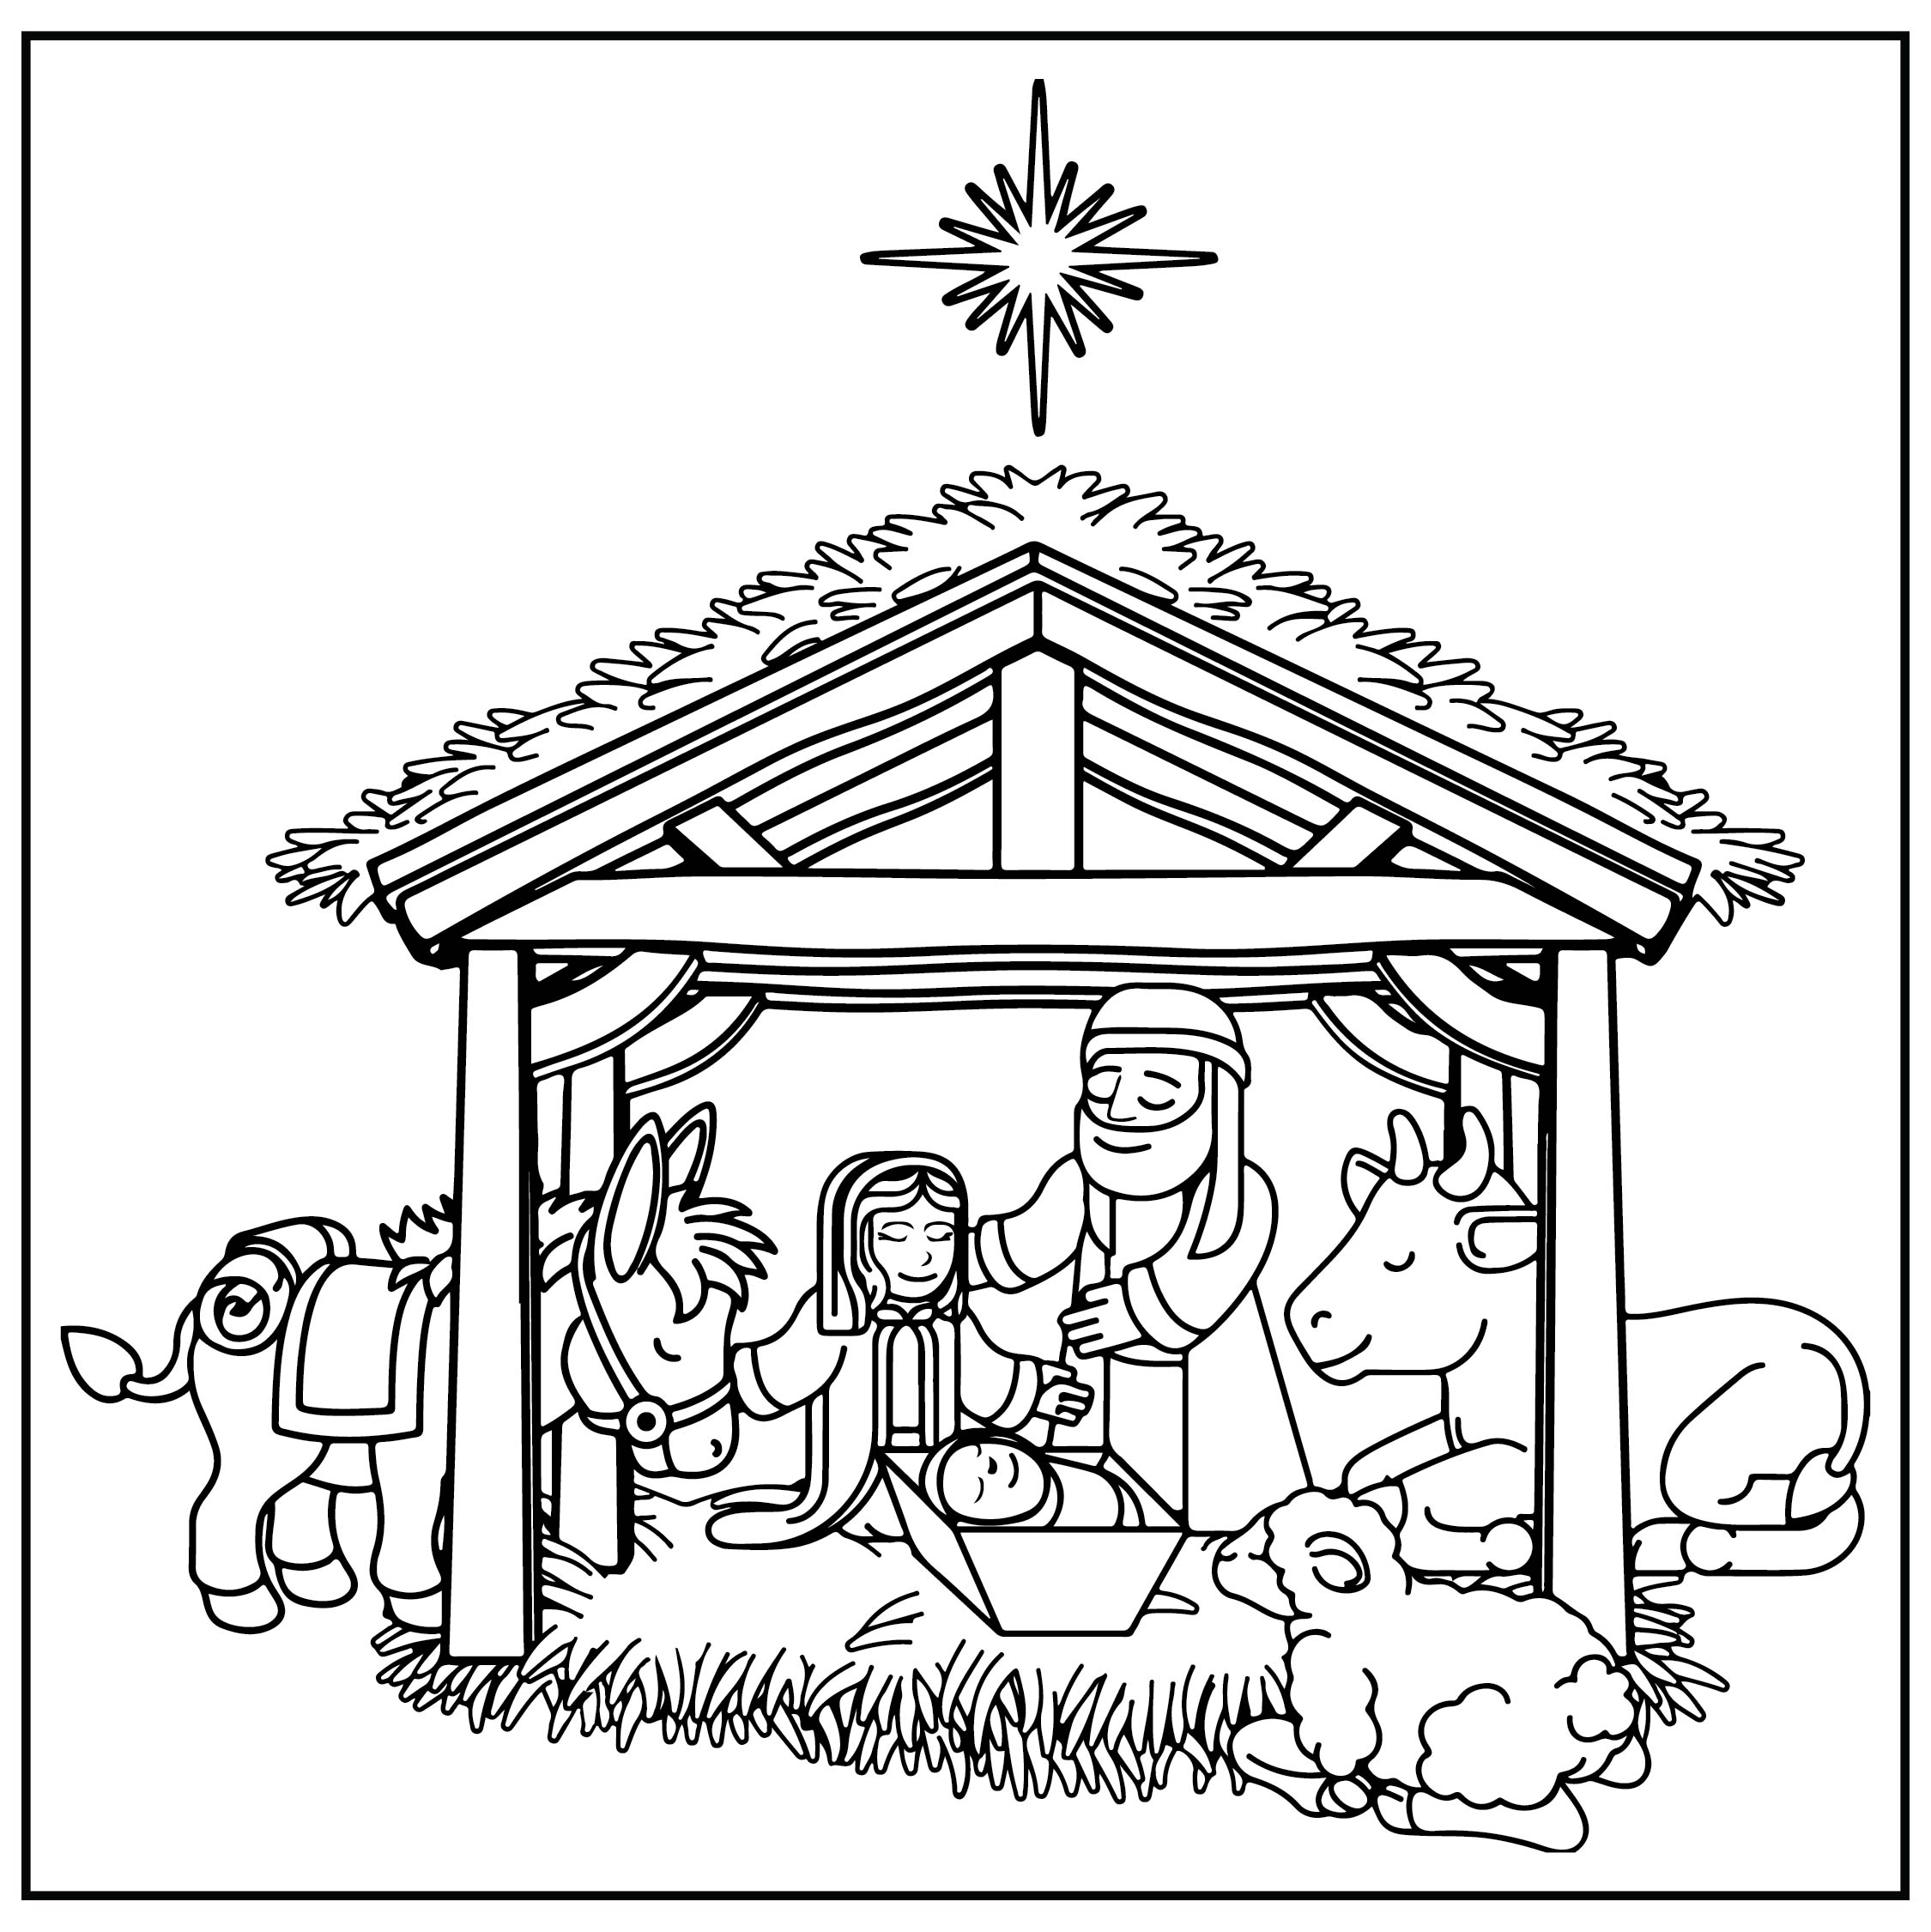 15 Best Christmas Nativity Scene Coloring Page Printable PDF For Free At Printablee